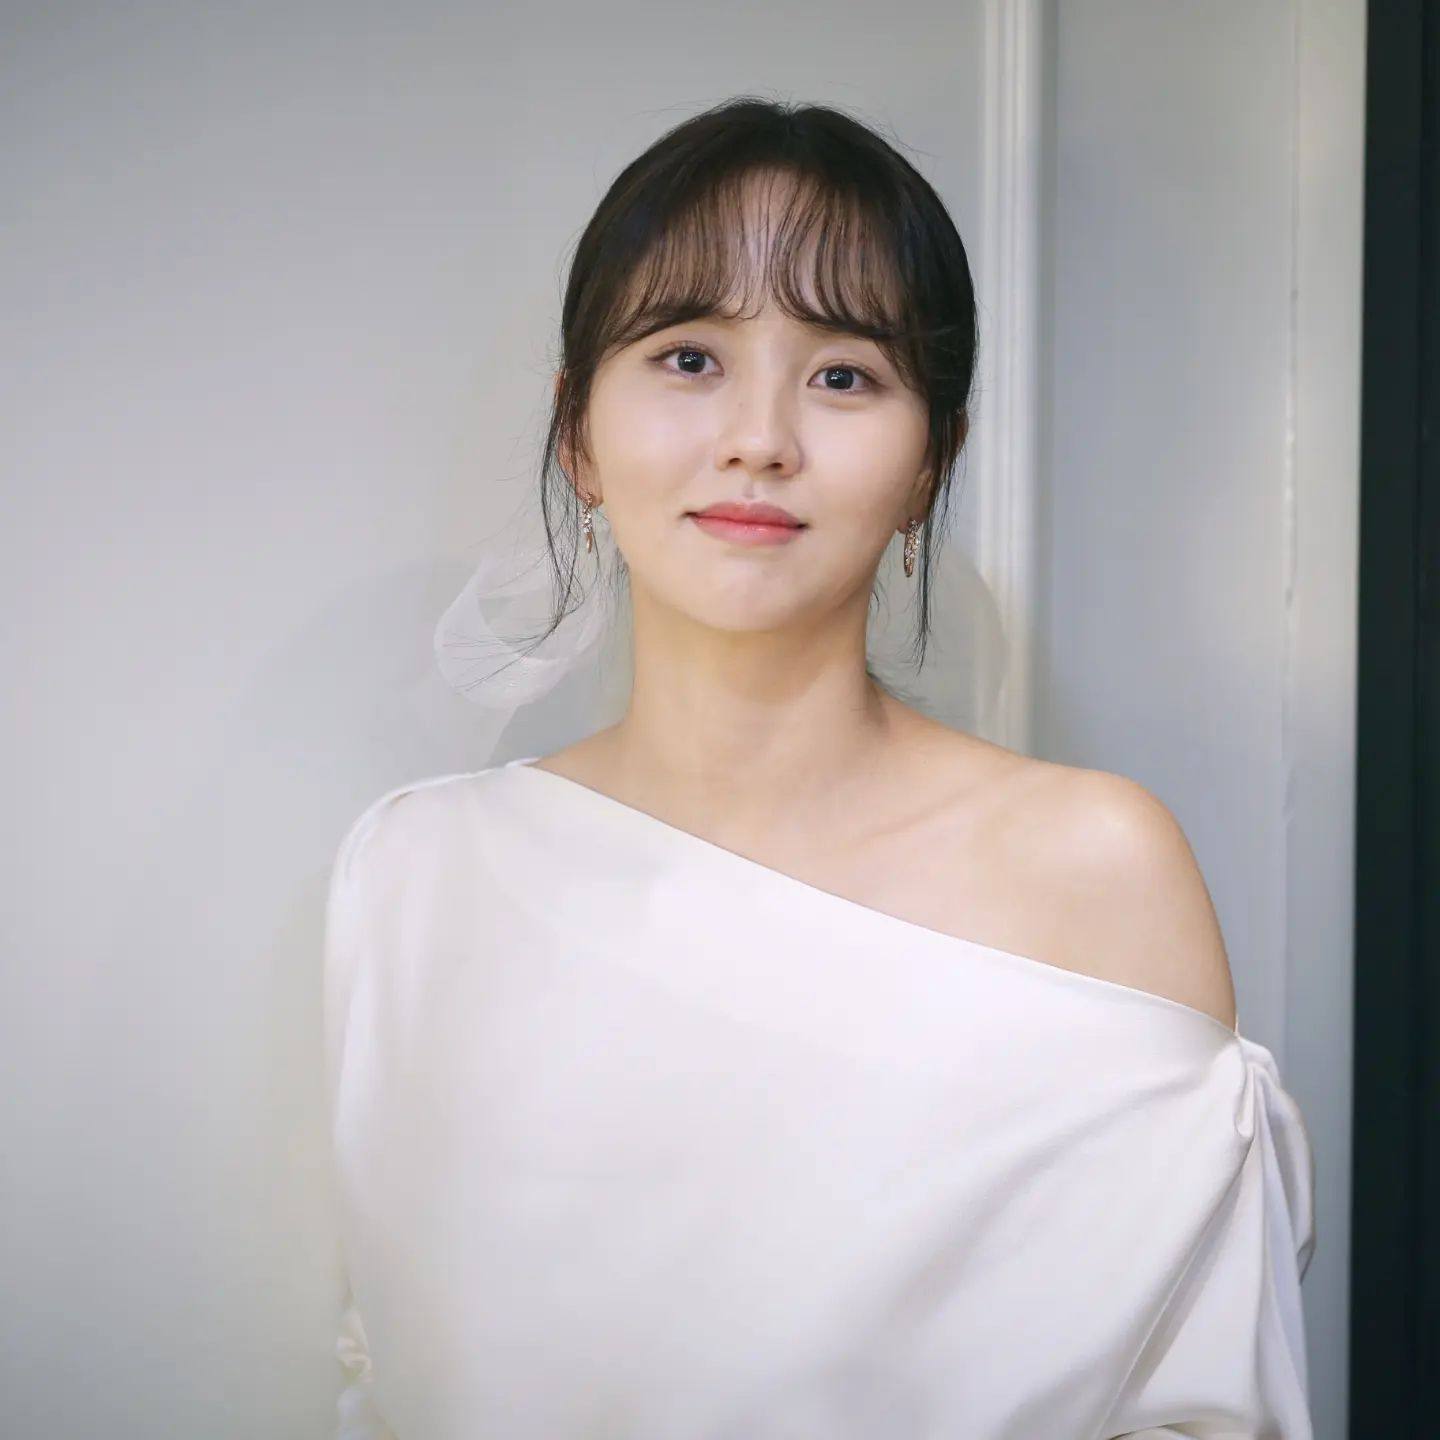 Korean actress Kim So-hyun, currently starring in drama series “My Lovely Liar”, is still only 24 but has been on our screens for 18 years. Photo: Instagram/@wow_kimsohyun.